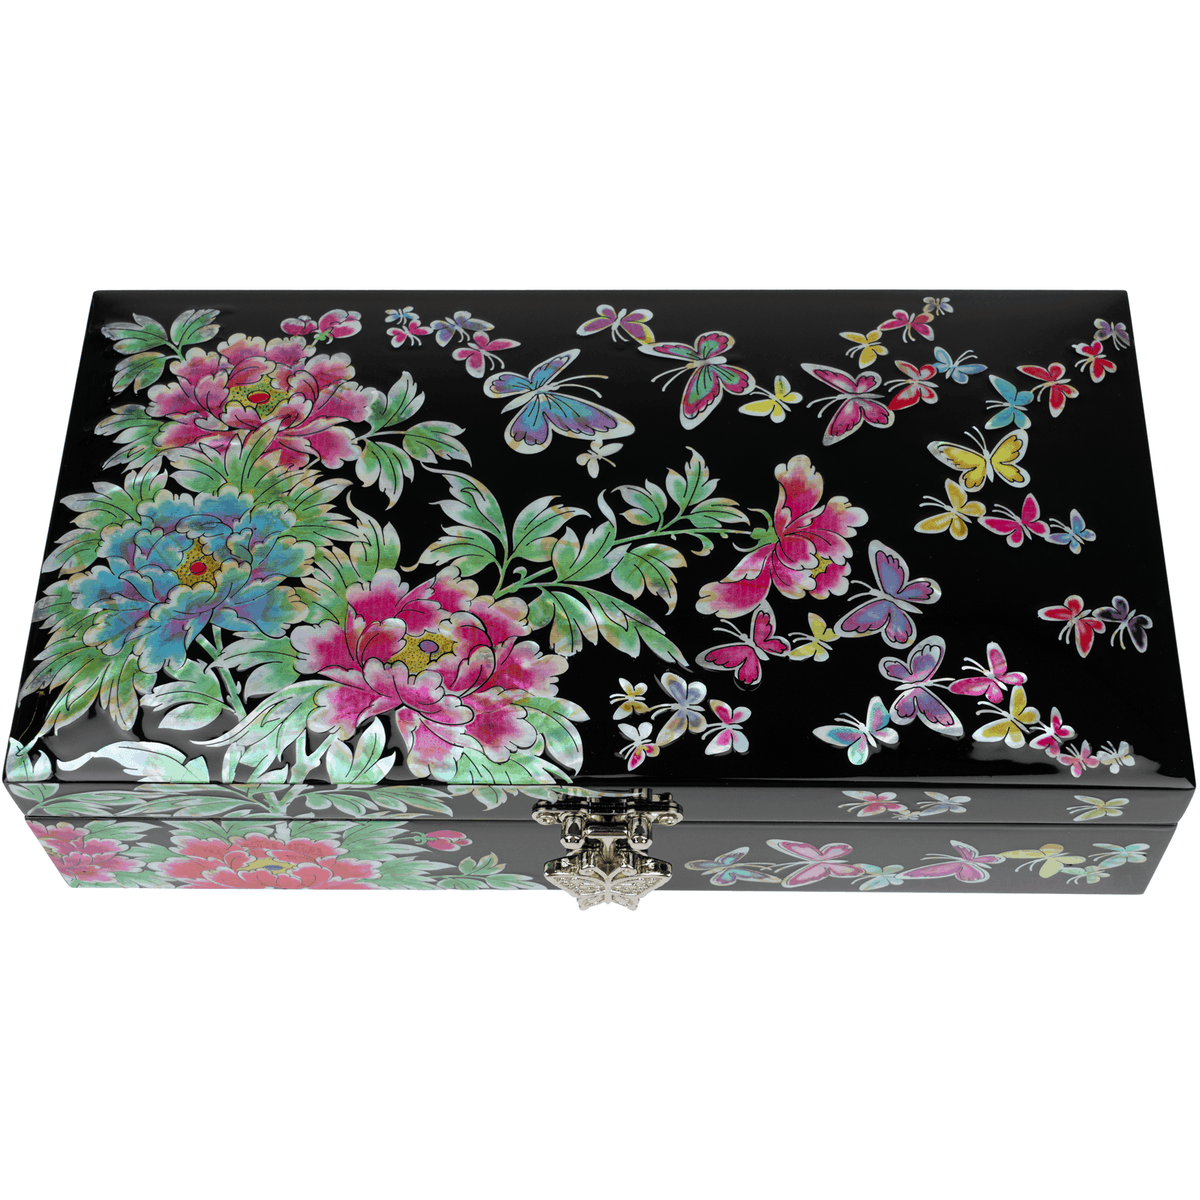 February Mountain Korean Mother of Pearl Jewelry box for Women